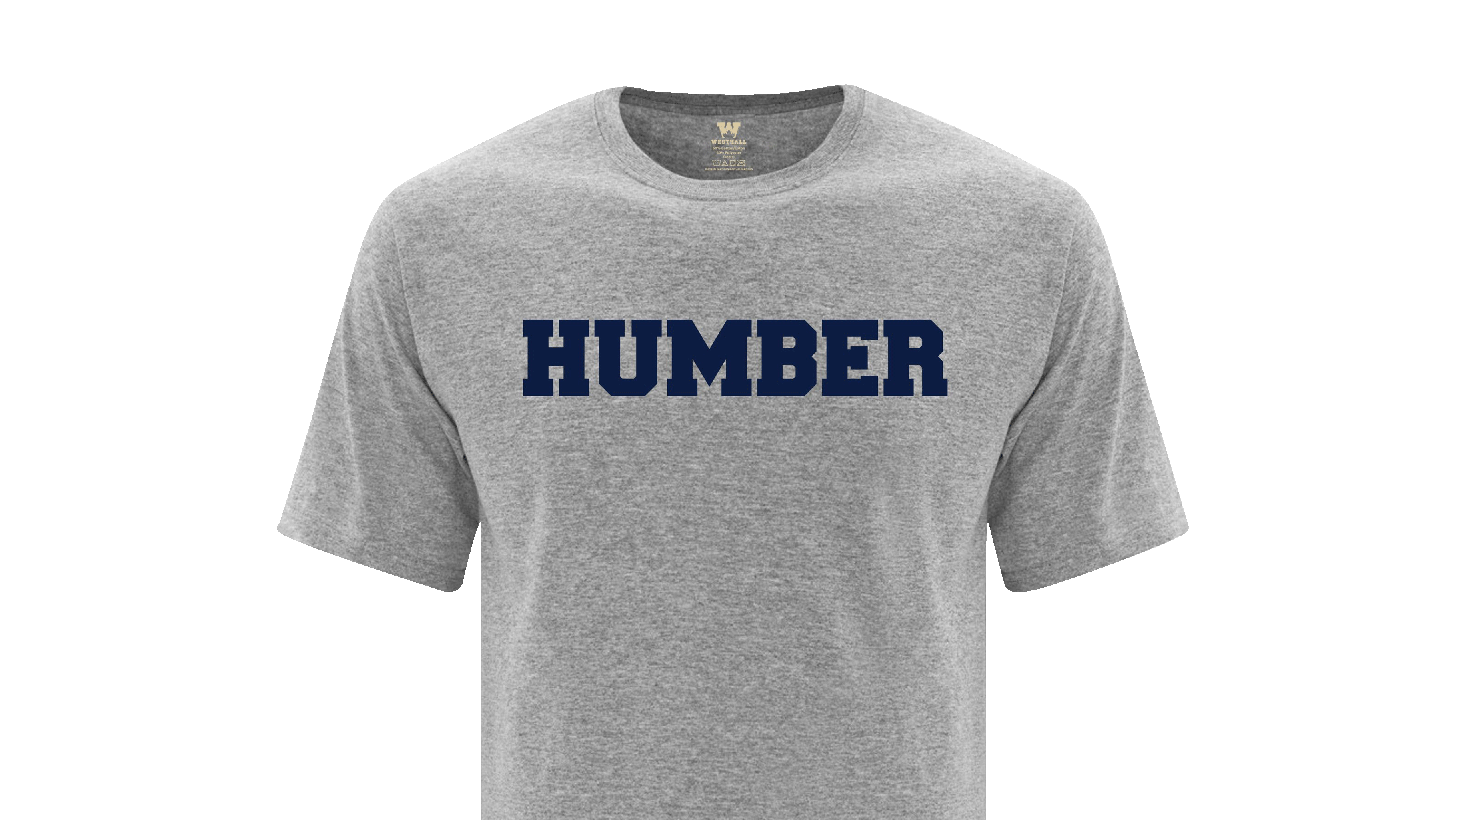 Humber Campus Stores Apparel, Merchandise, & Gifts